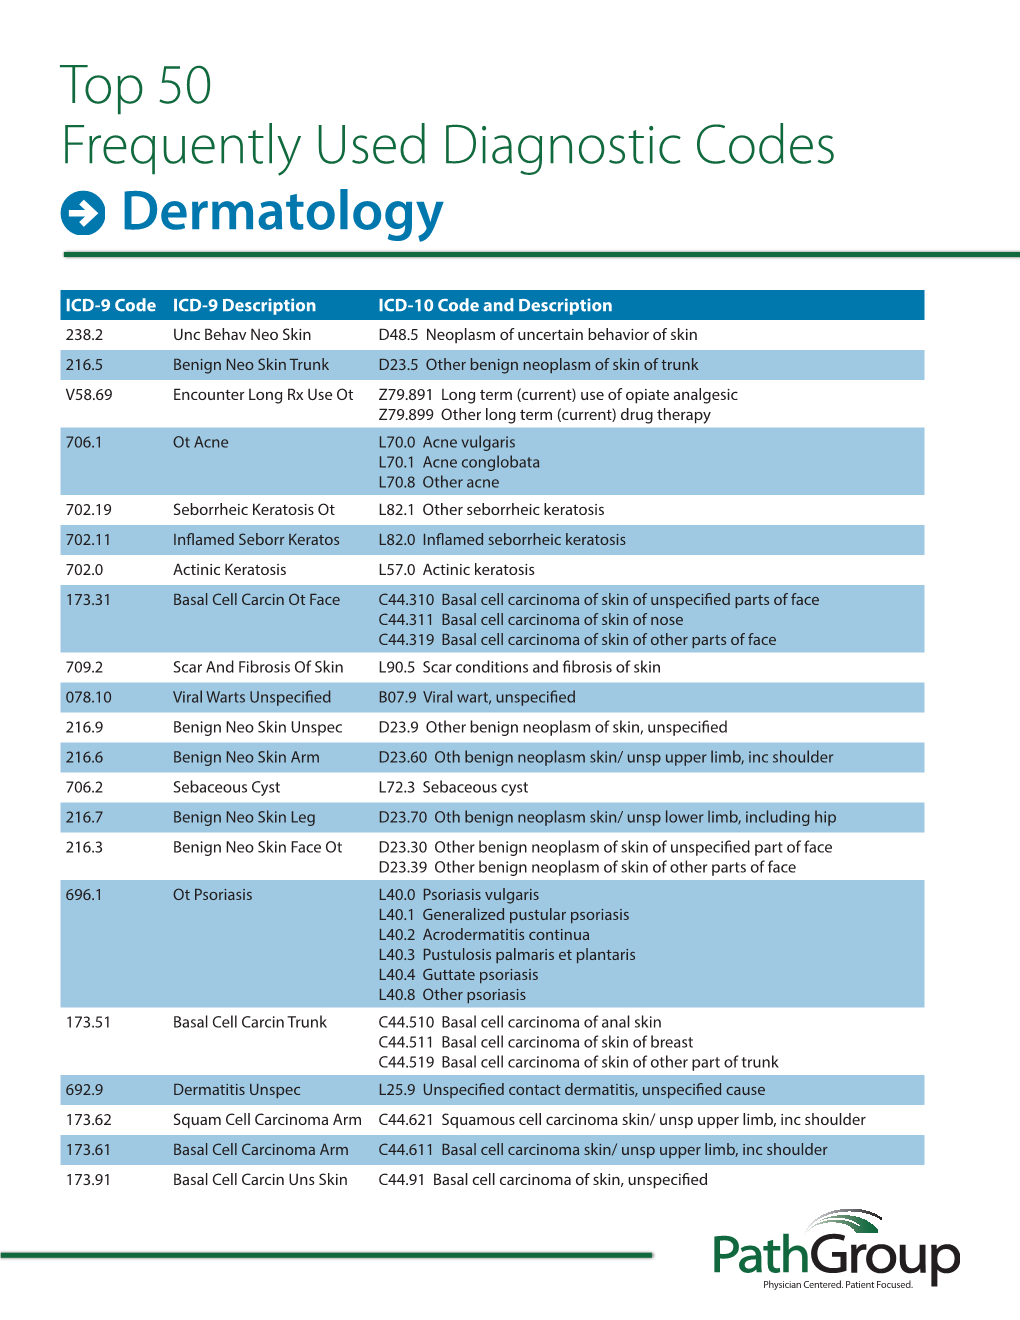 Top 50 Frequently Used Diagnostic Codes Dermatology